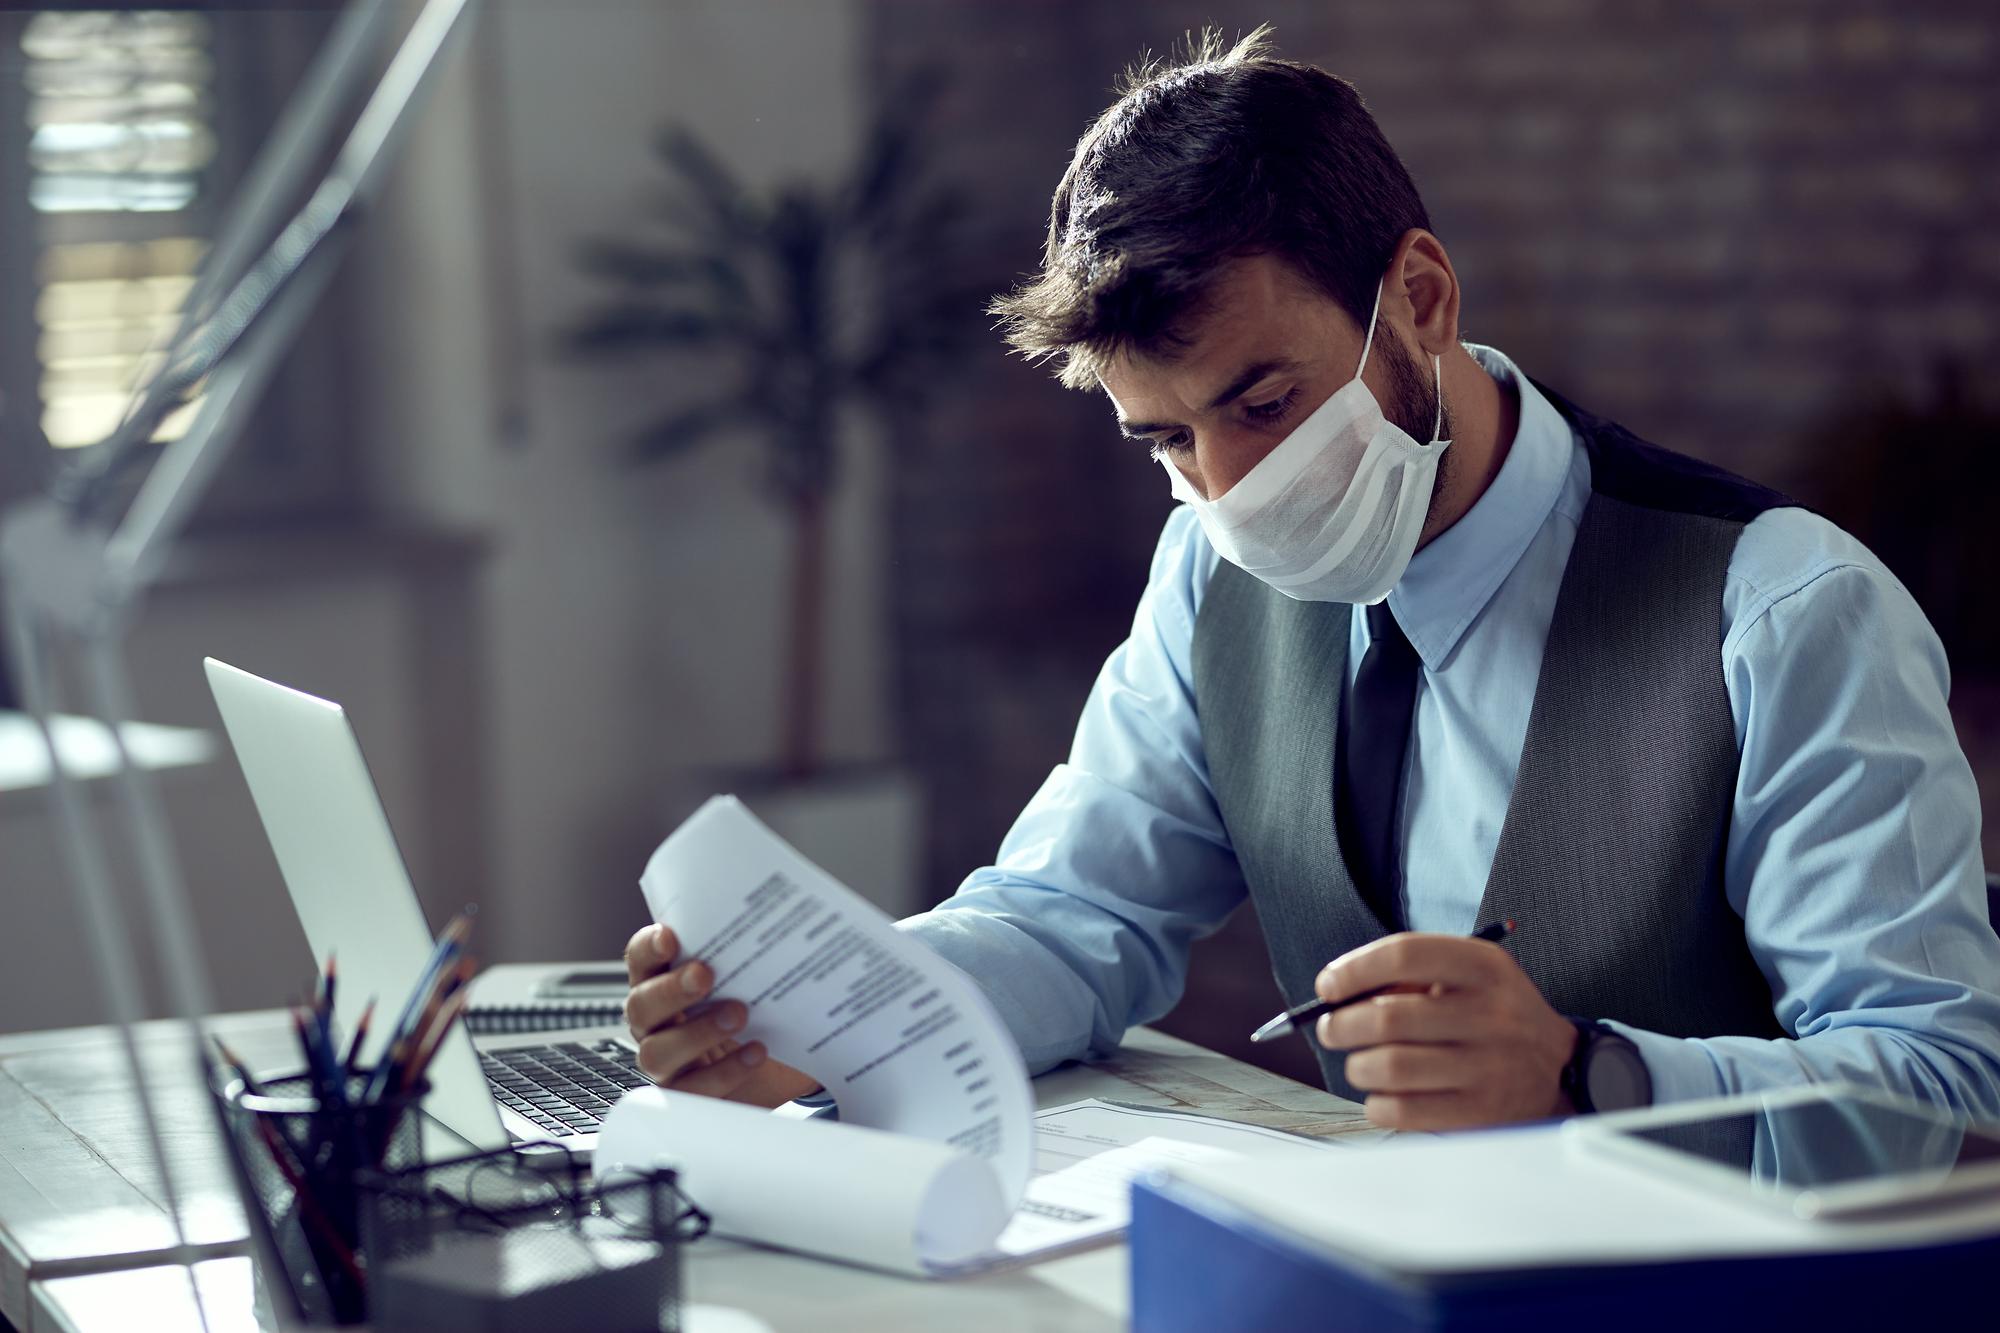 male-entrepreneur-analyzing-business-reports-while-wearing-face-mask-working-office-during-virus-epidemic_637285-6349